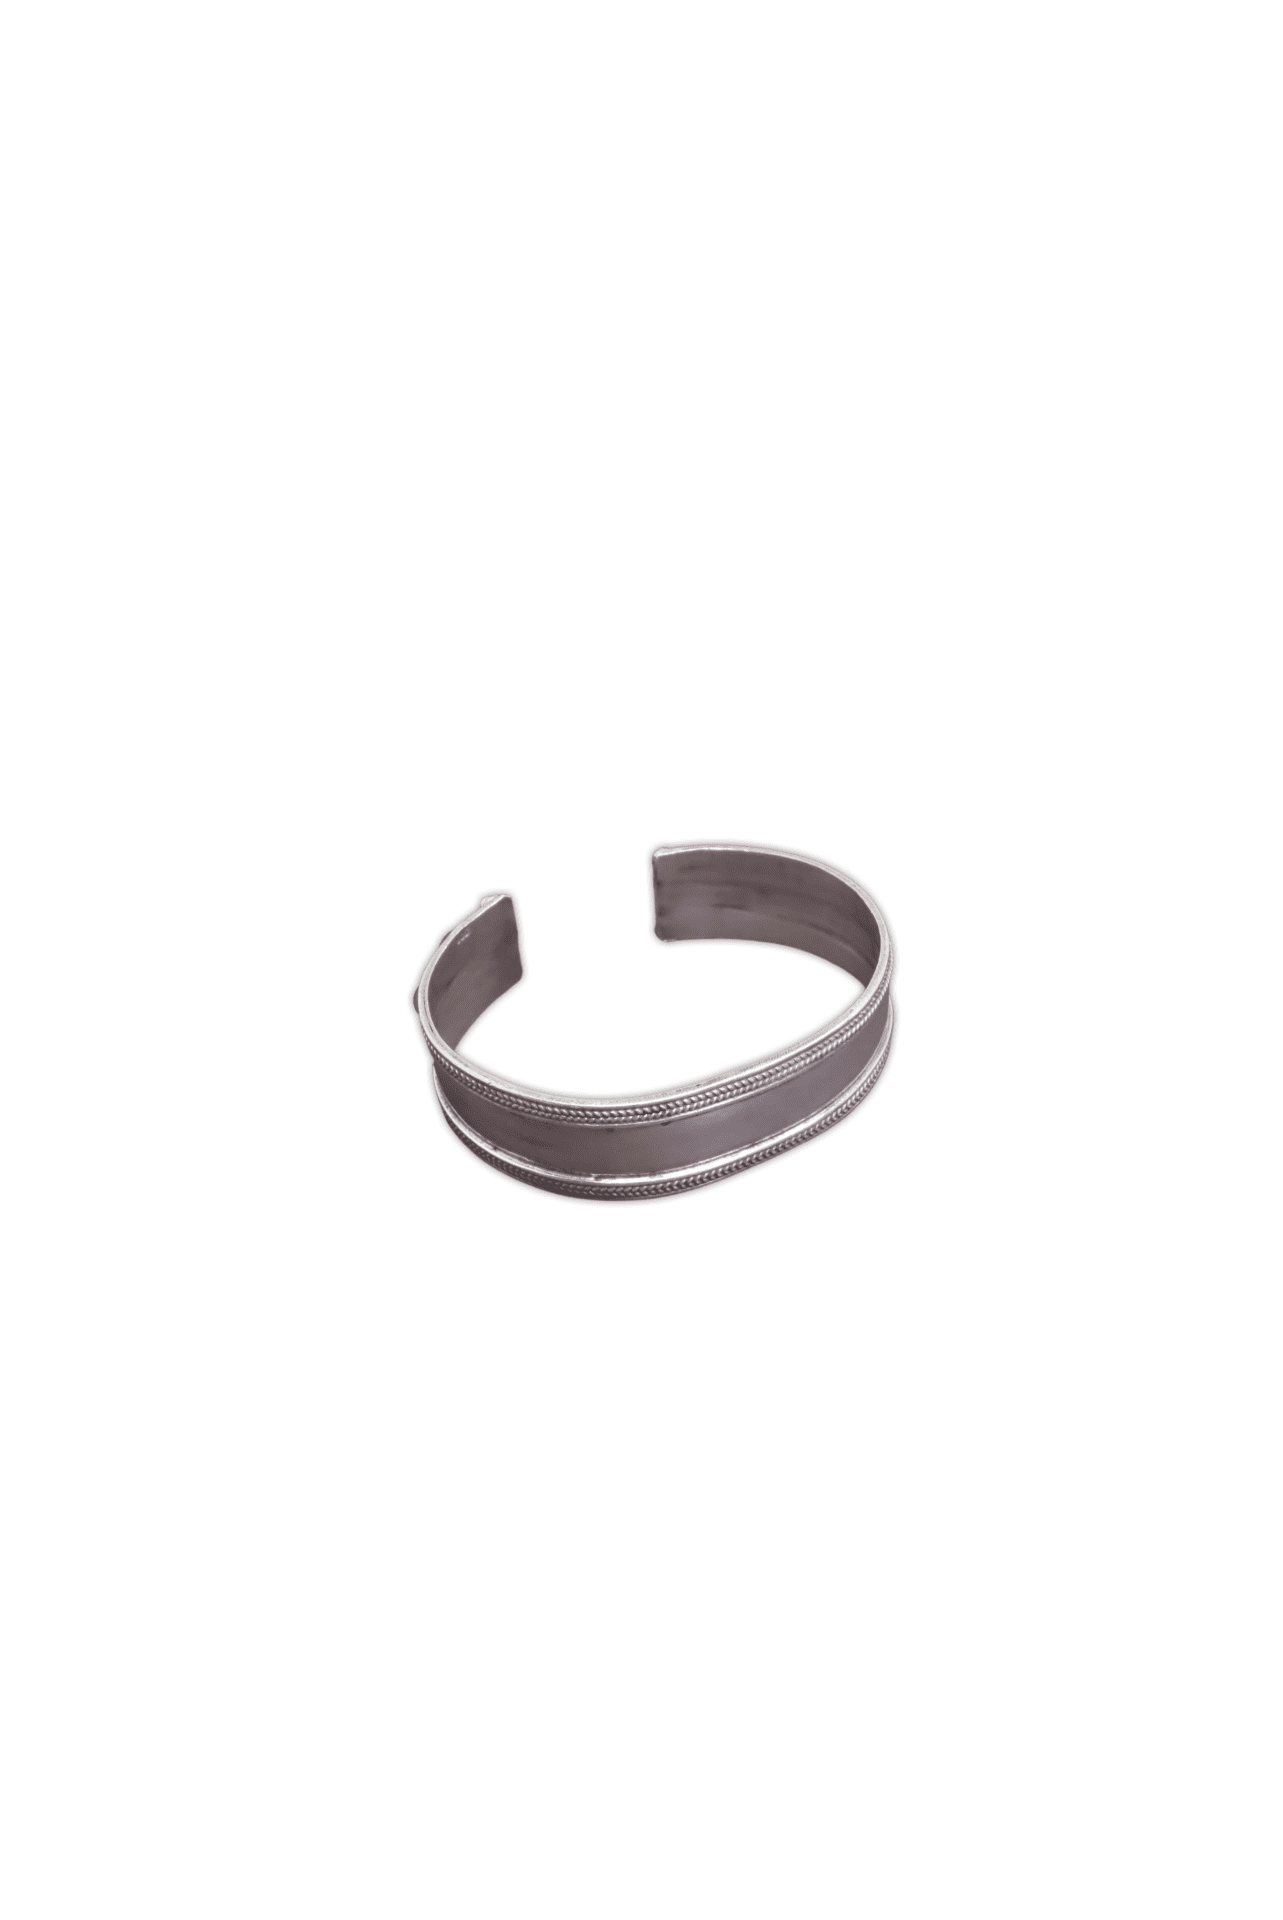 Sterling silver cuff bangle featuring intricate designs on the rim and near edges of bangle.